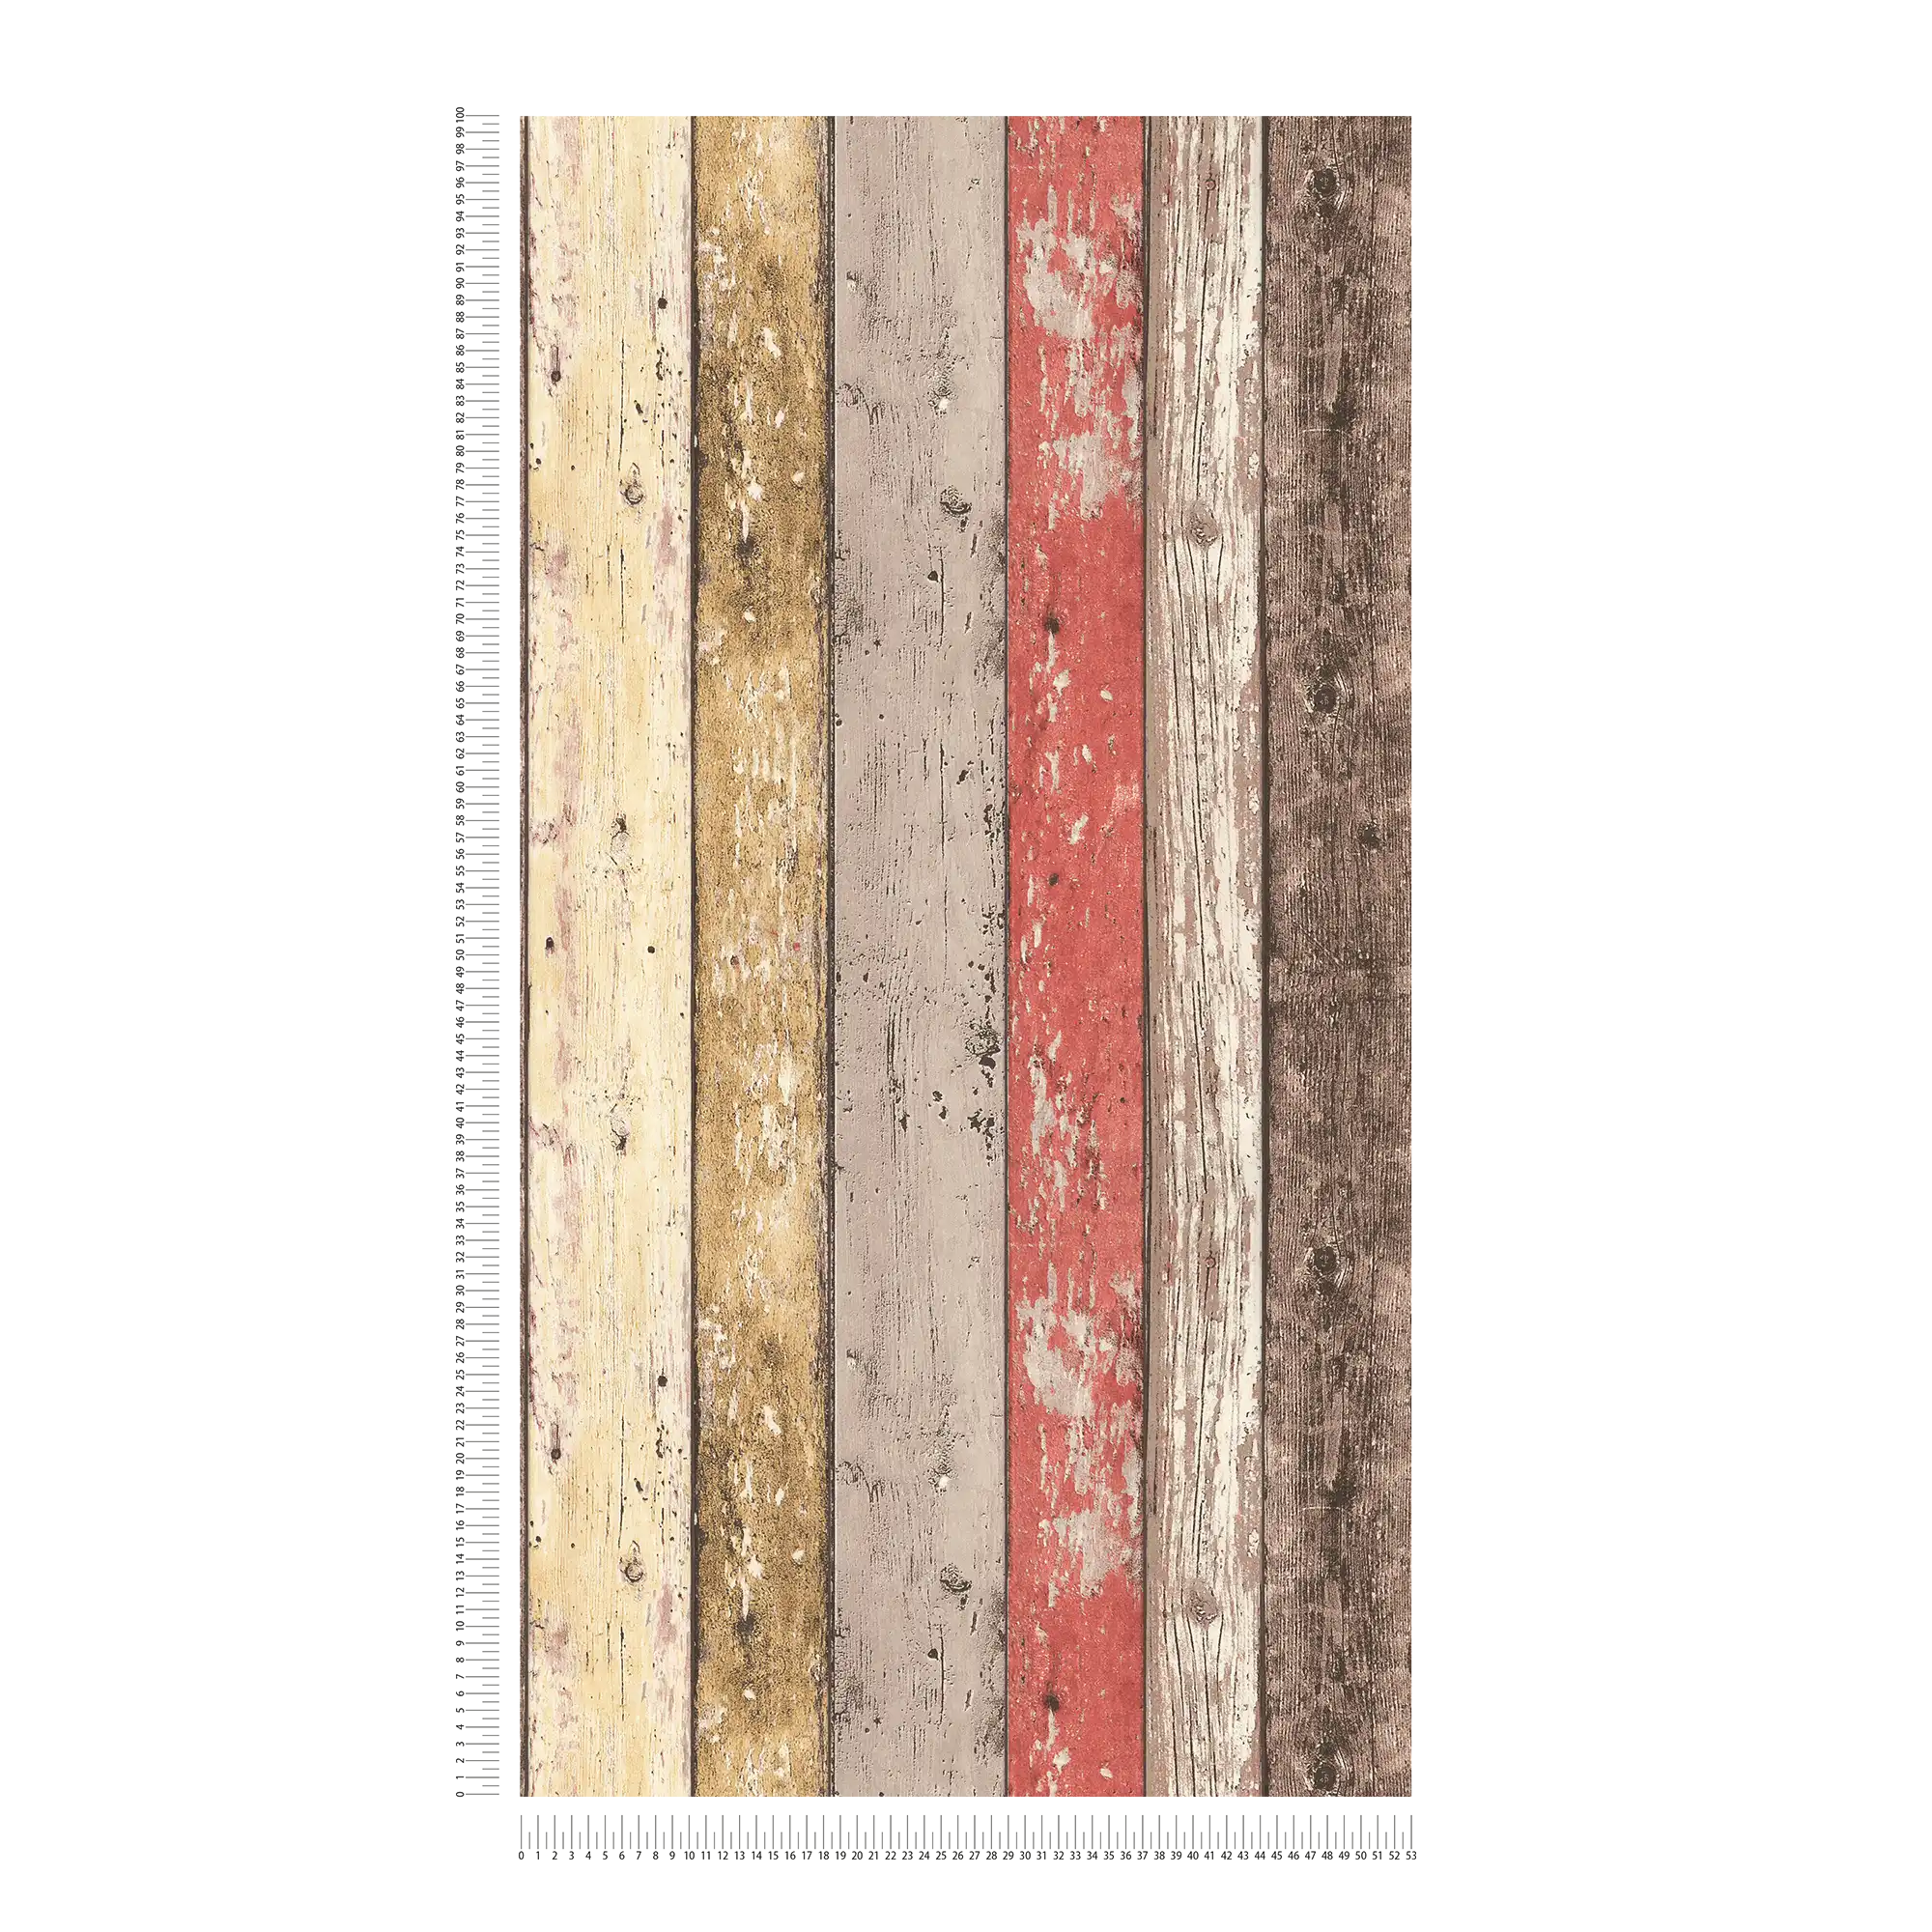             Wooden wallpaper with used look for vintage & country style - brown, red, beige
        